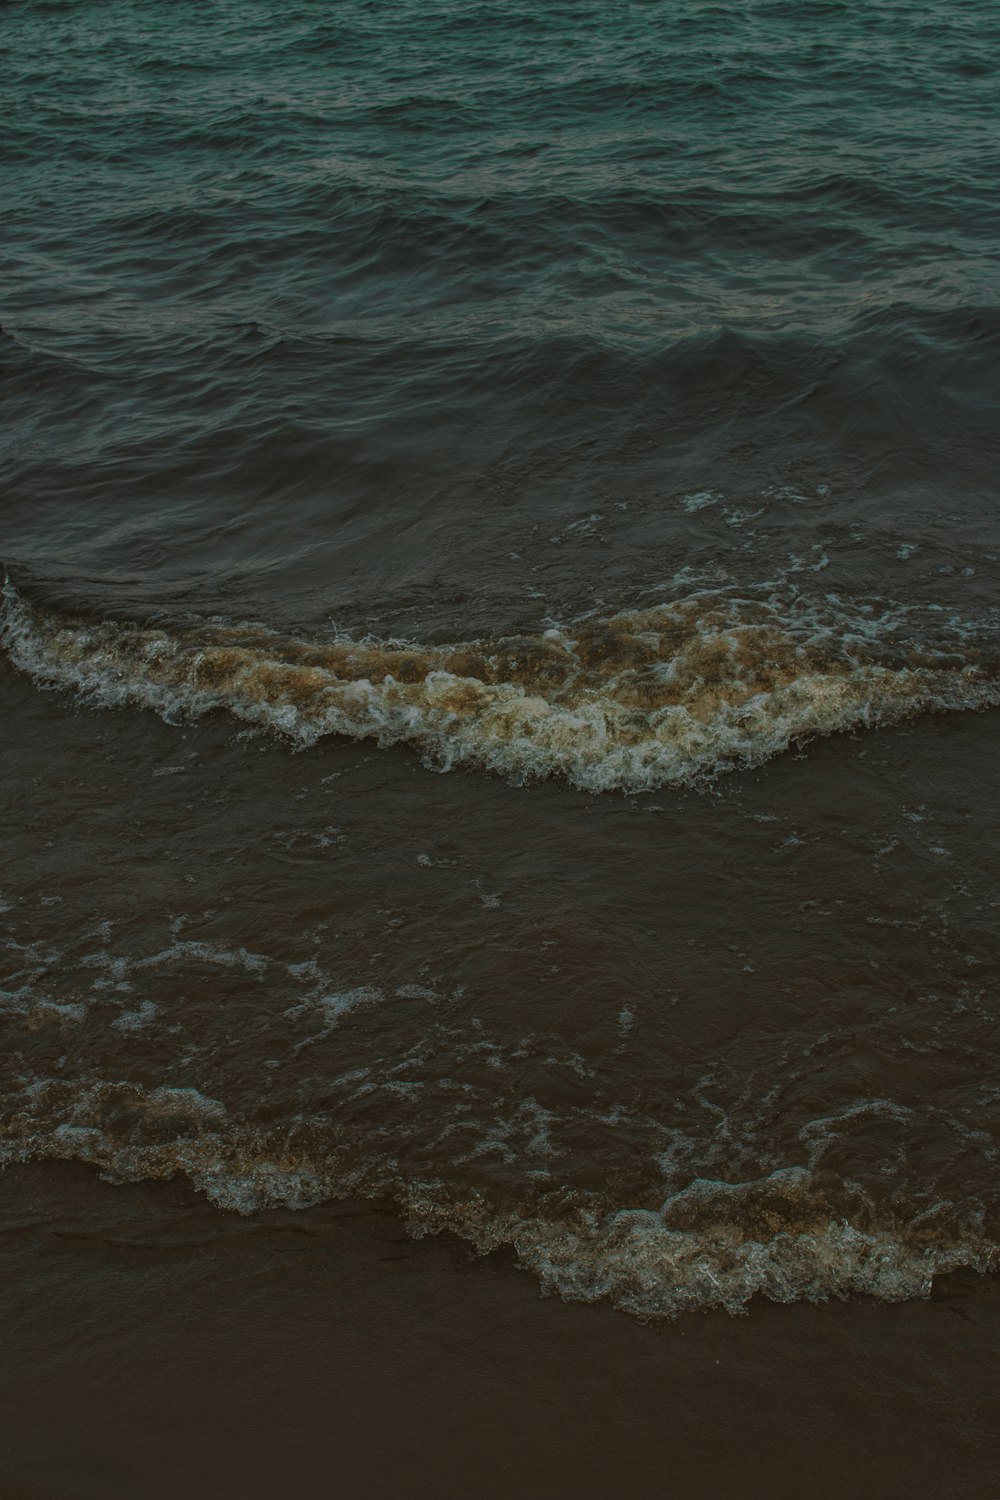 ocean waves on shore during daytime